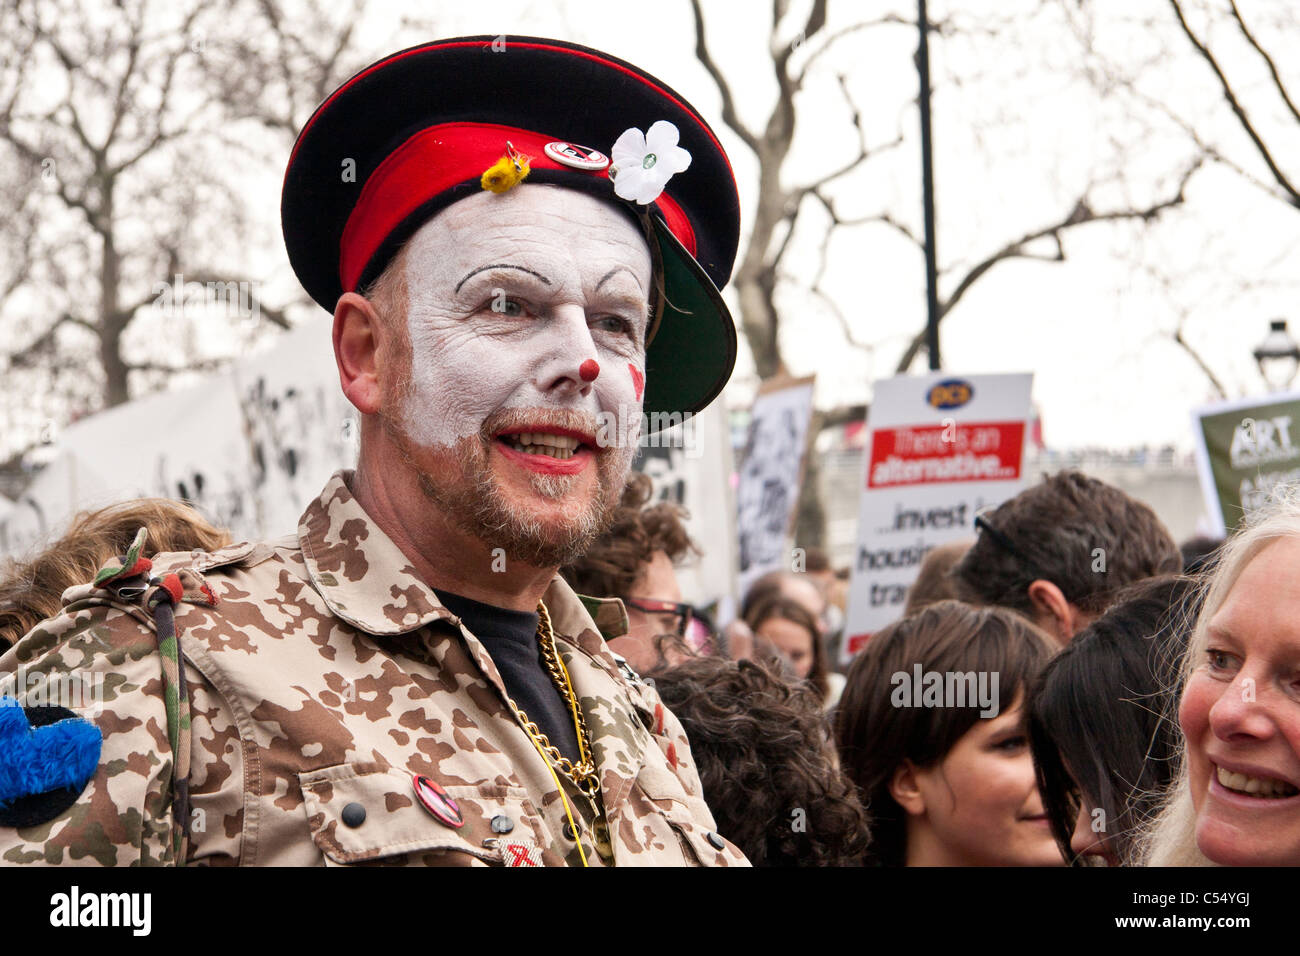 Clown make up man participating in a demonstration. Stock Photo